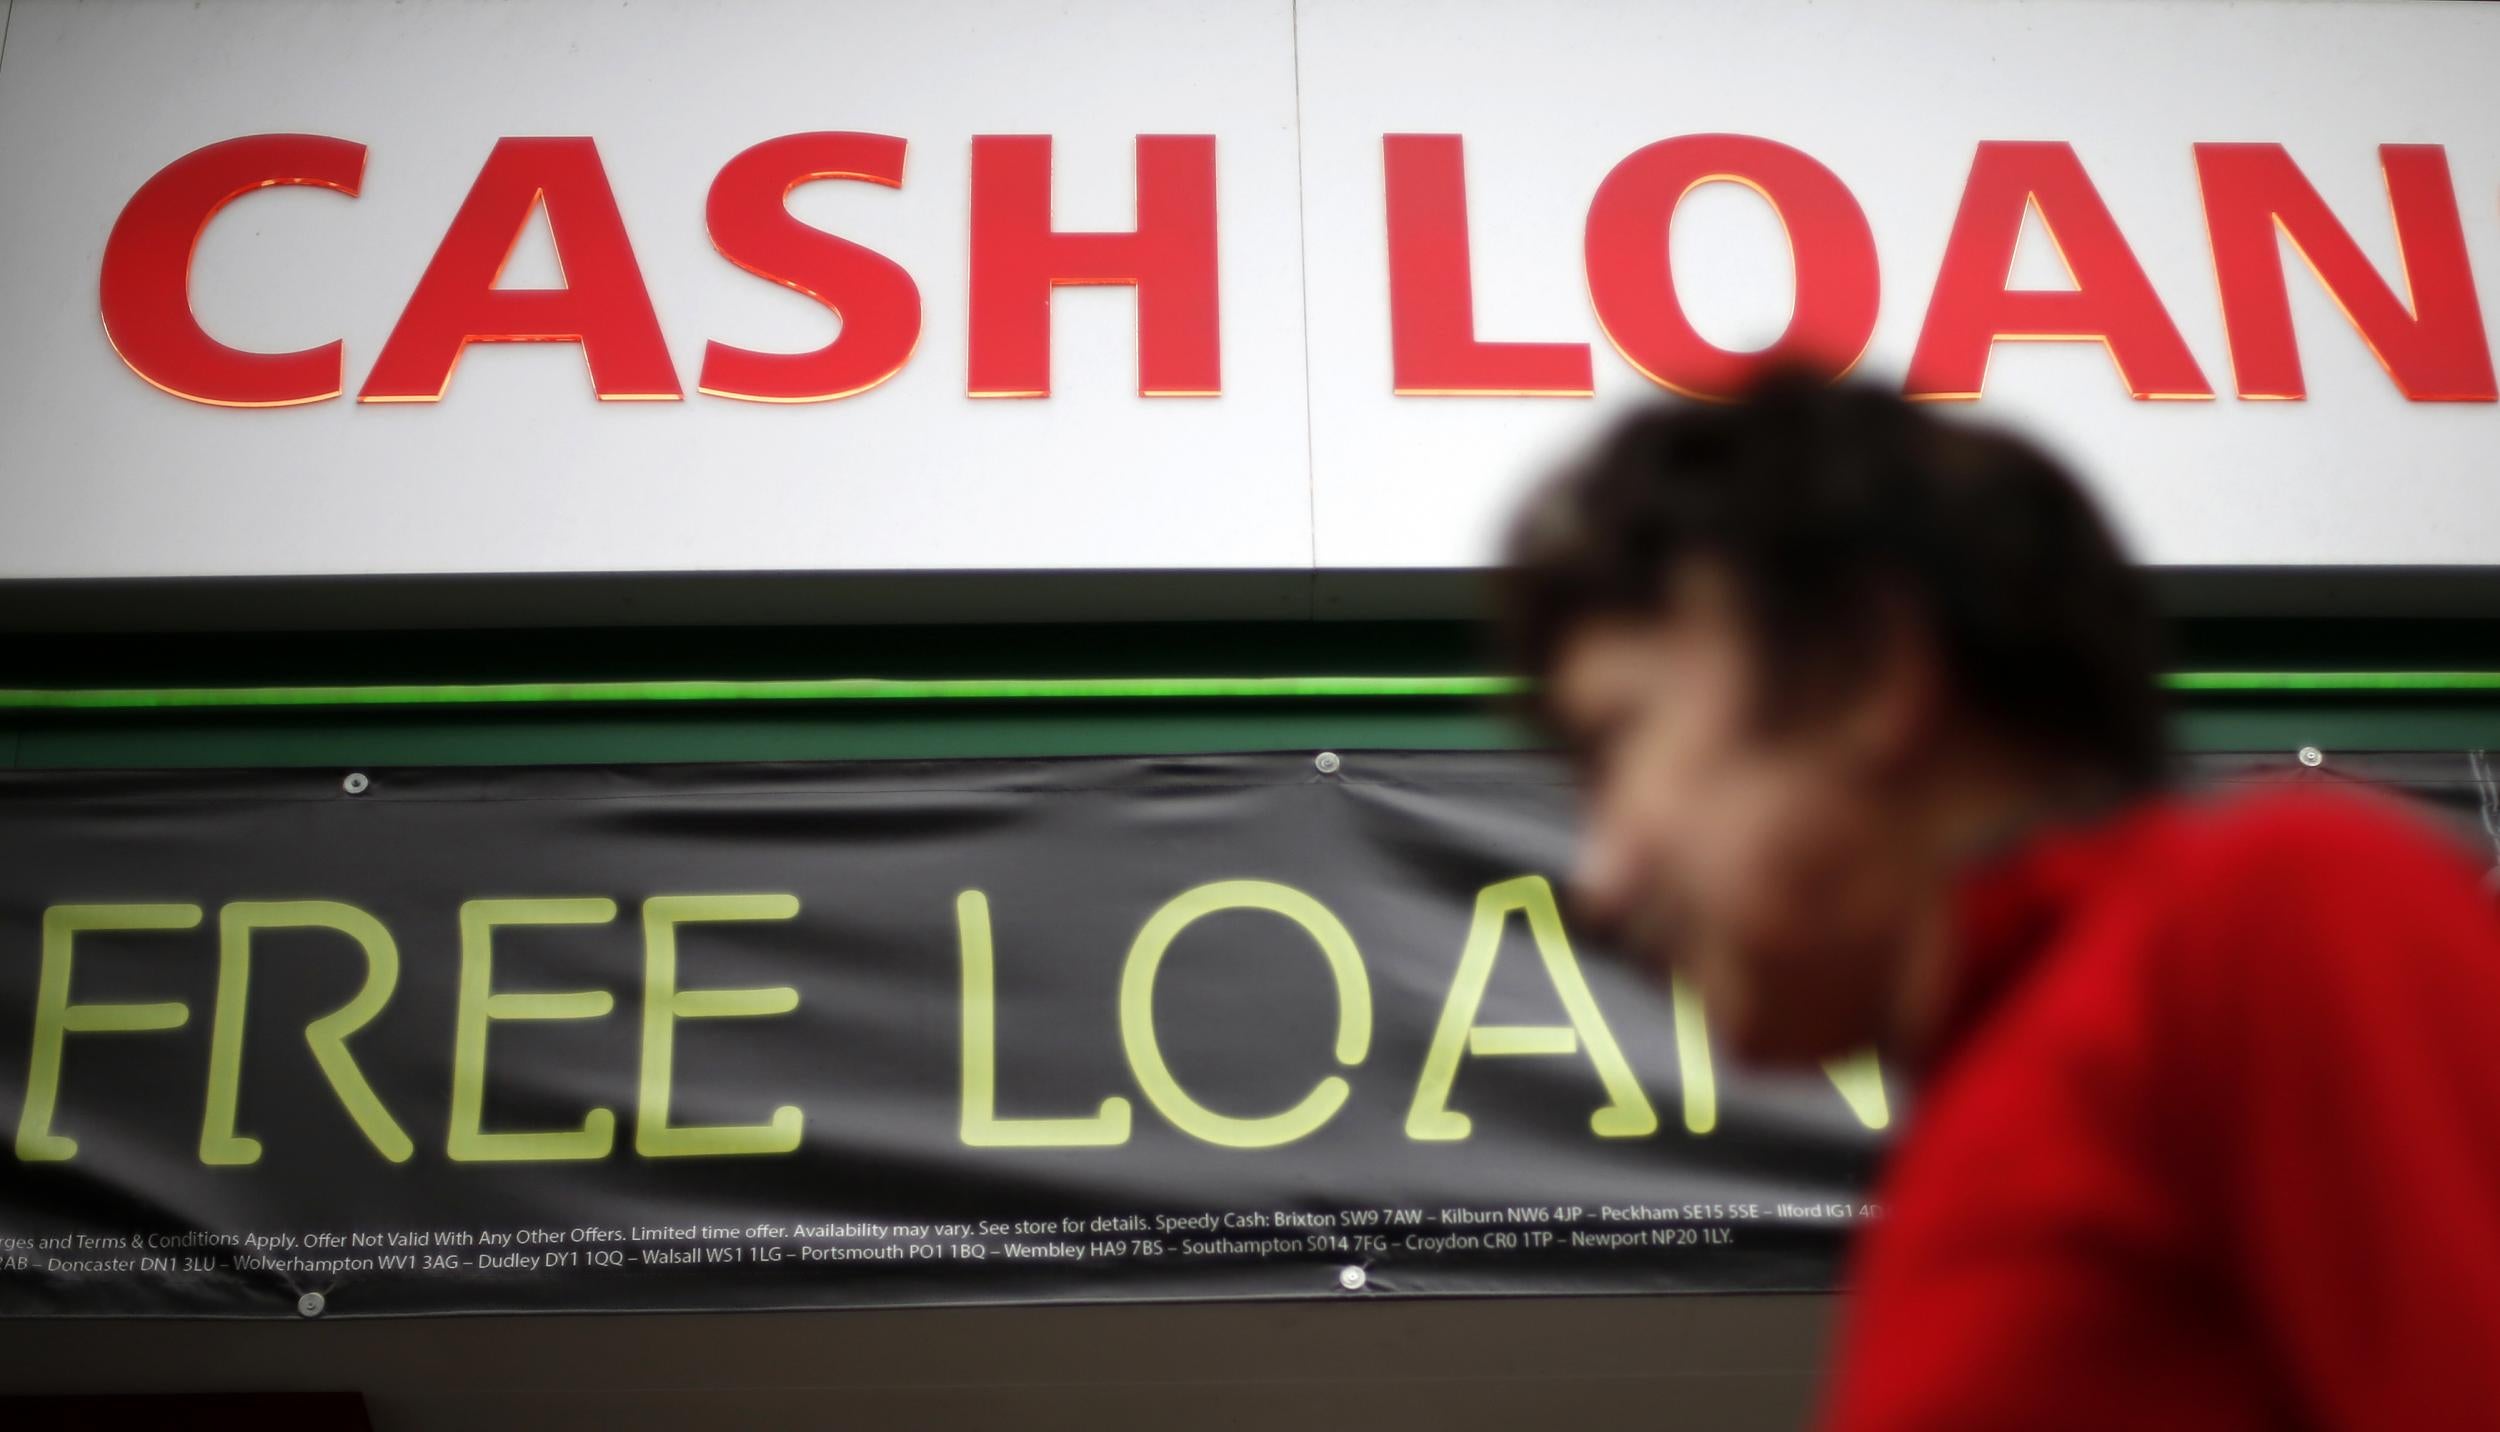 The Financial Ombudsman Service has described payday lenders' practices as "unacceptable"